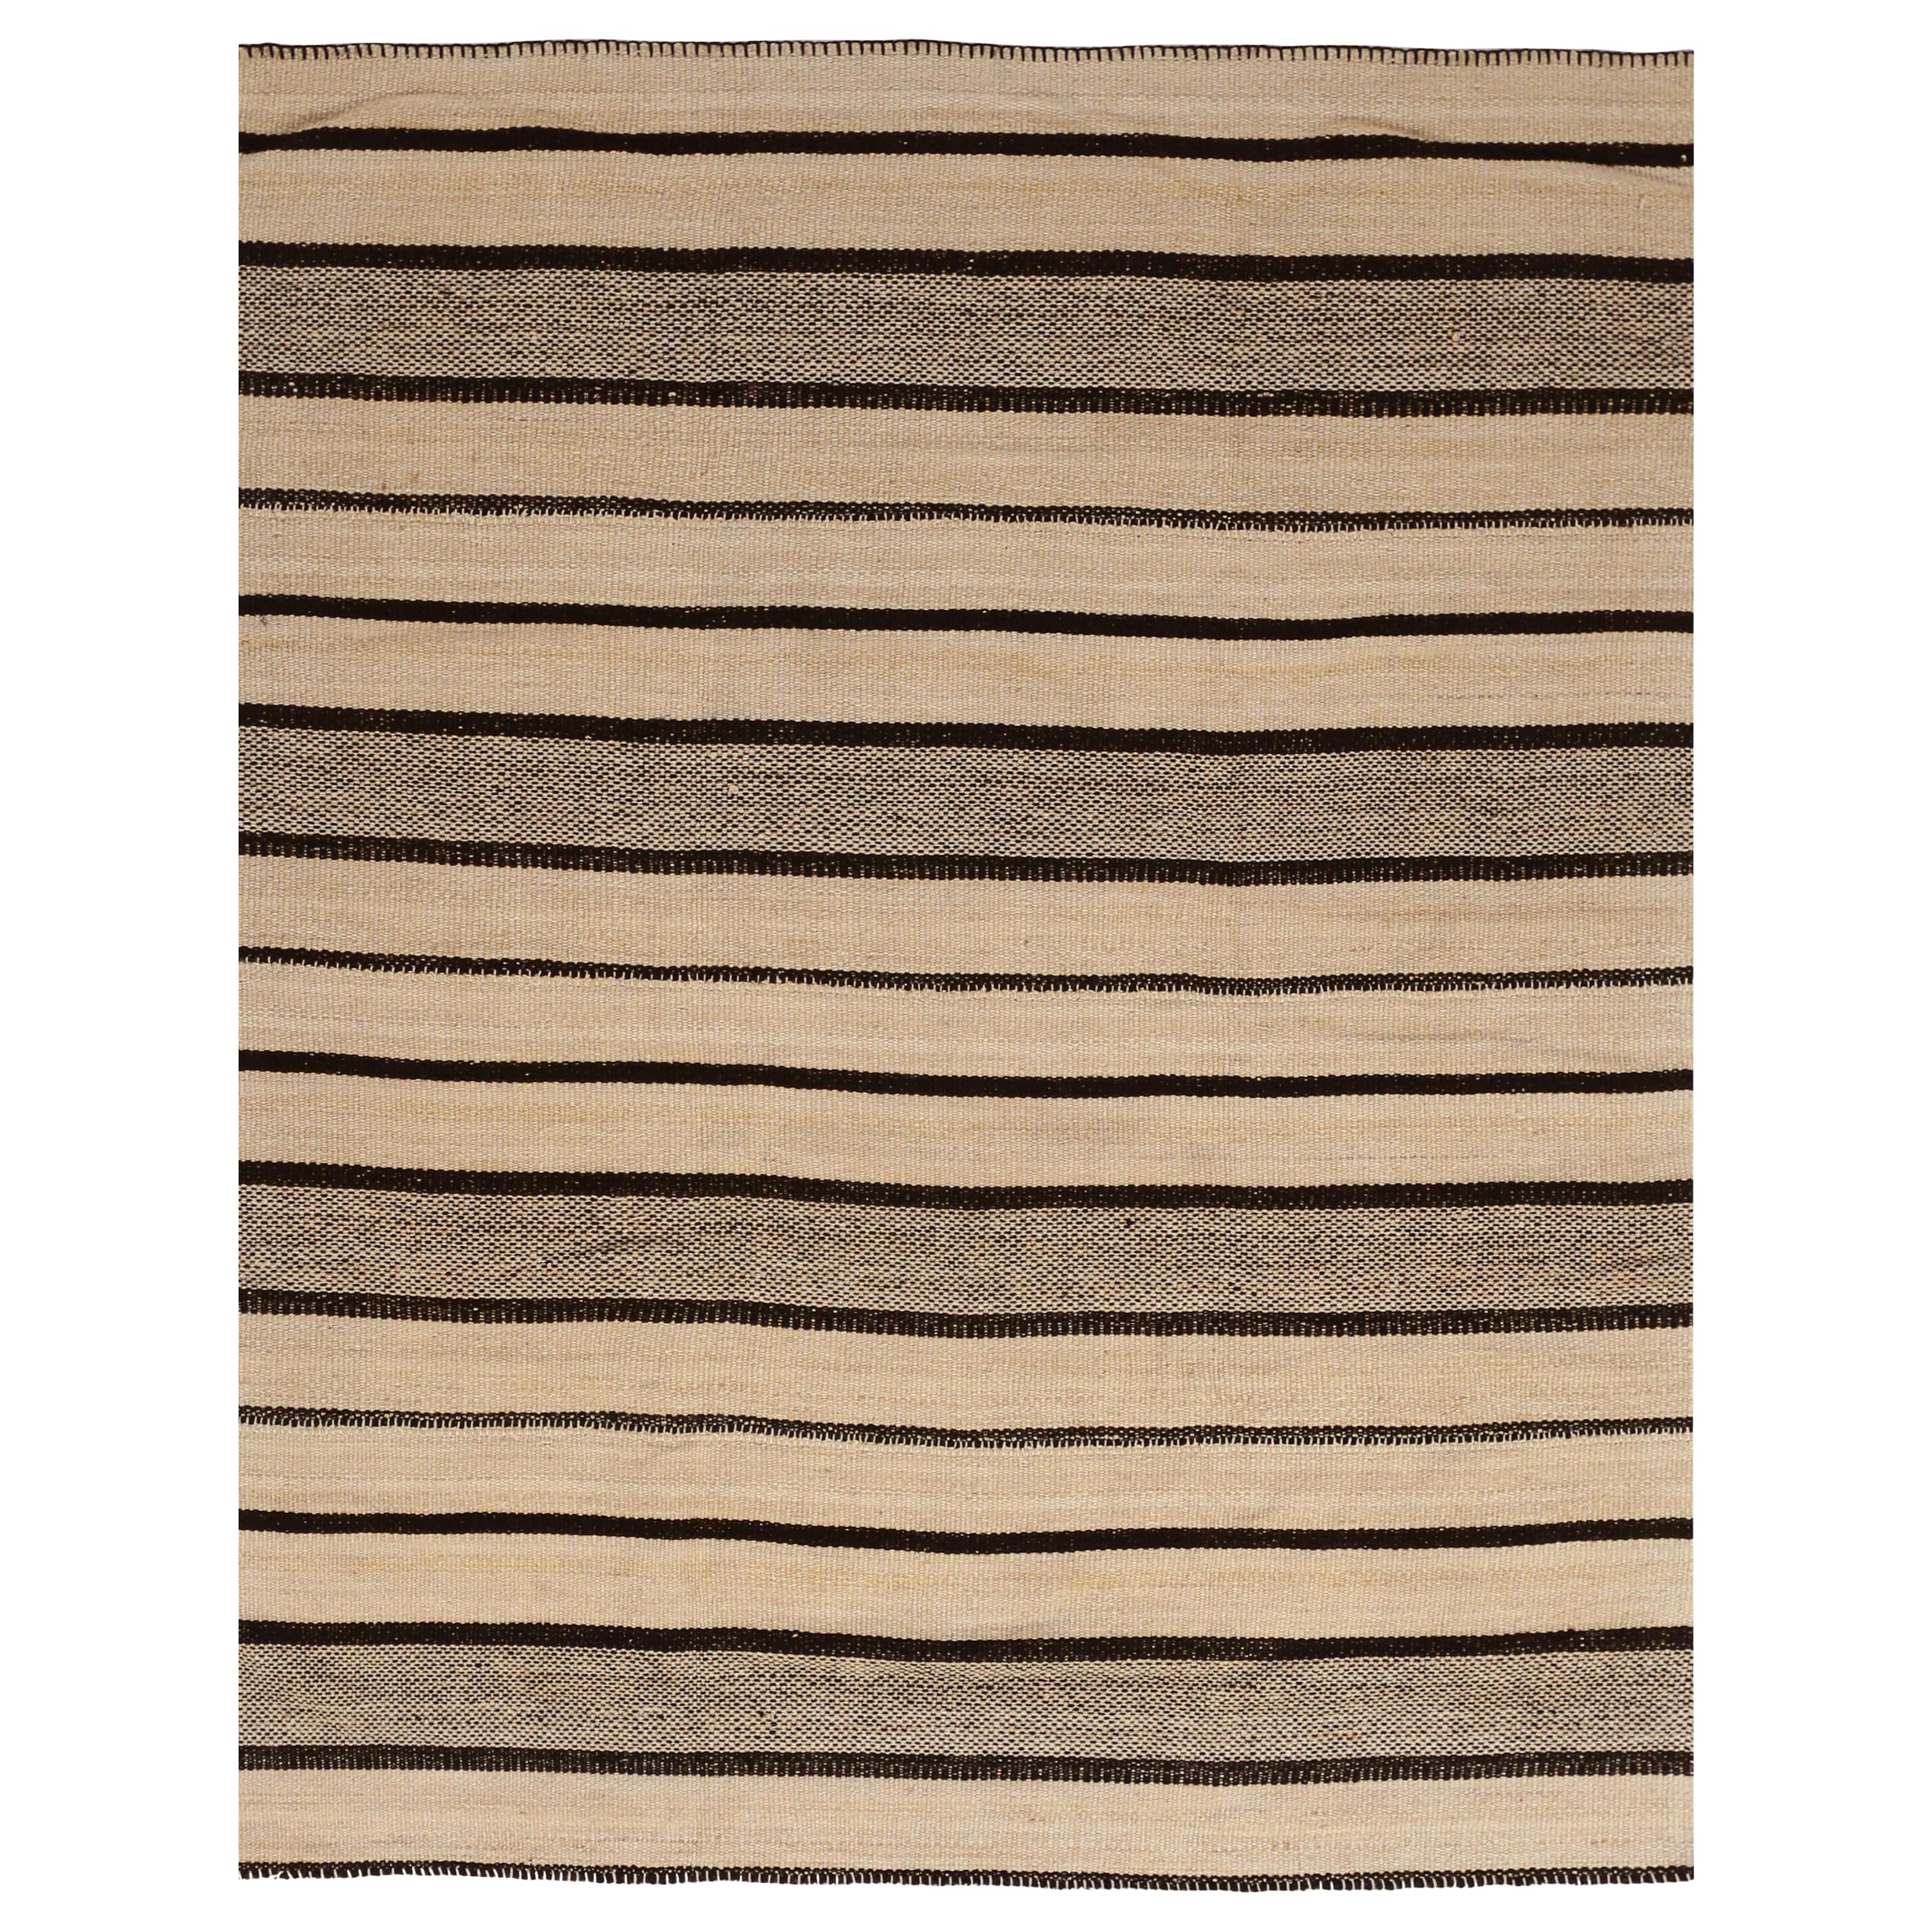 New Kilim Persian Rug with Thick and Thin Stripes in Black and Beige